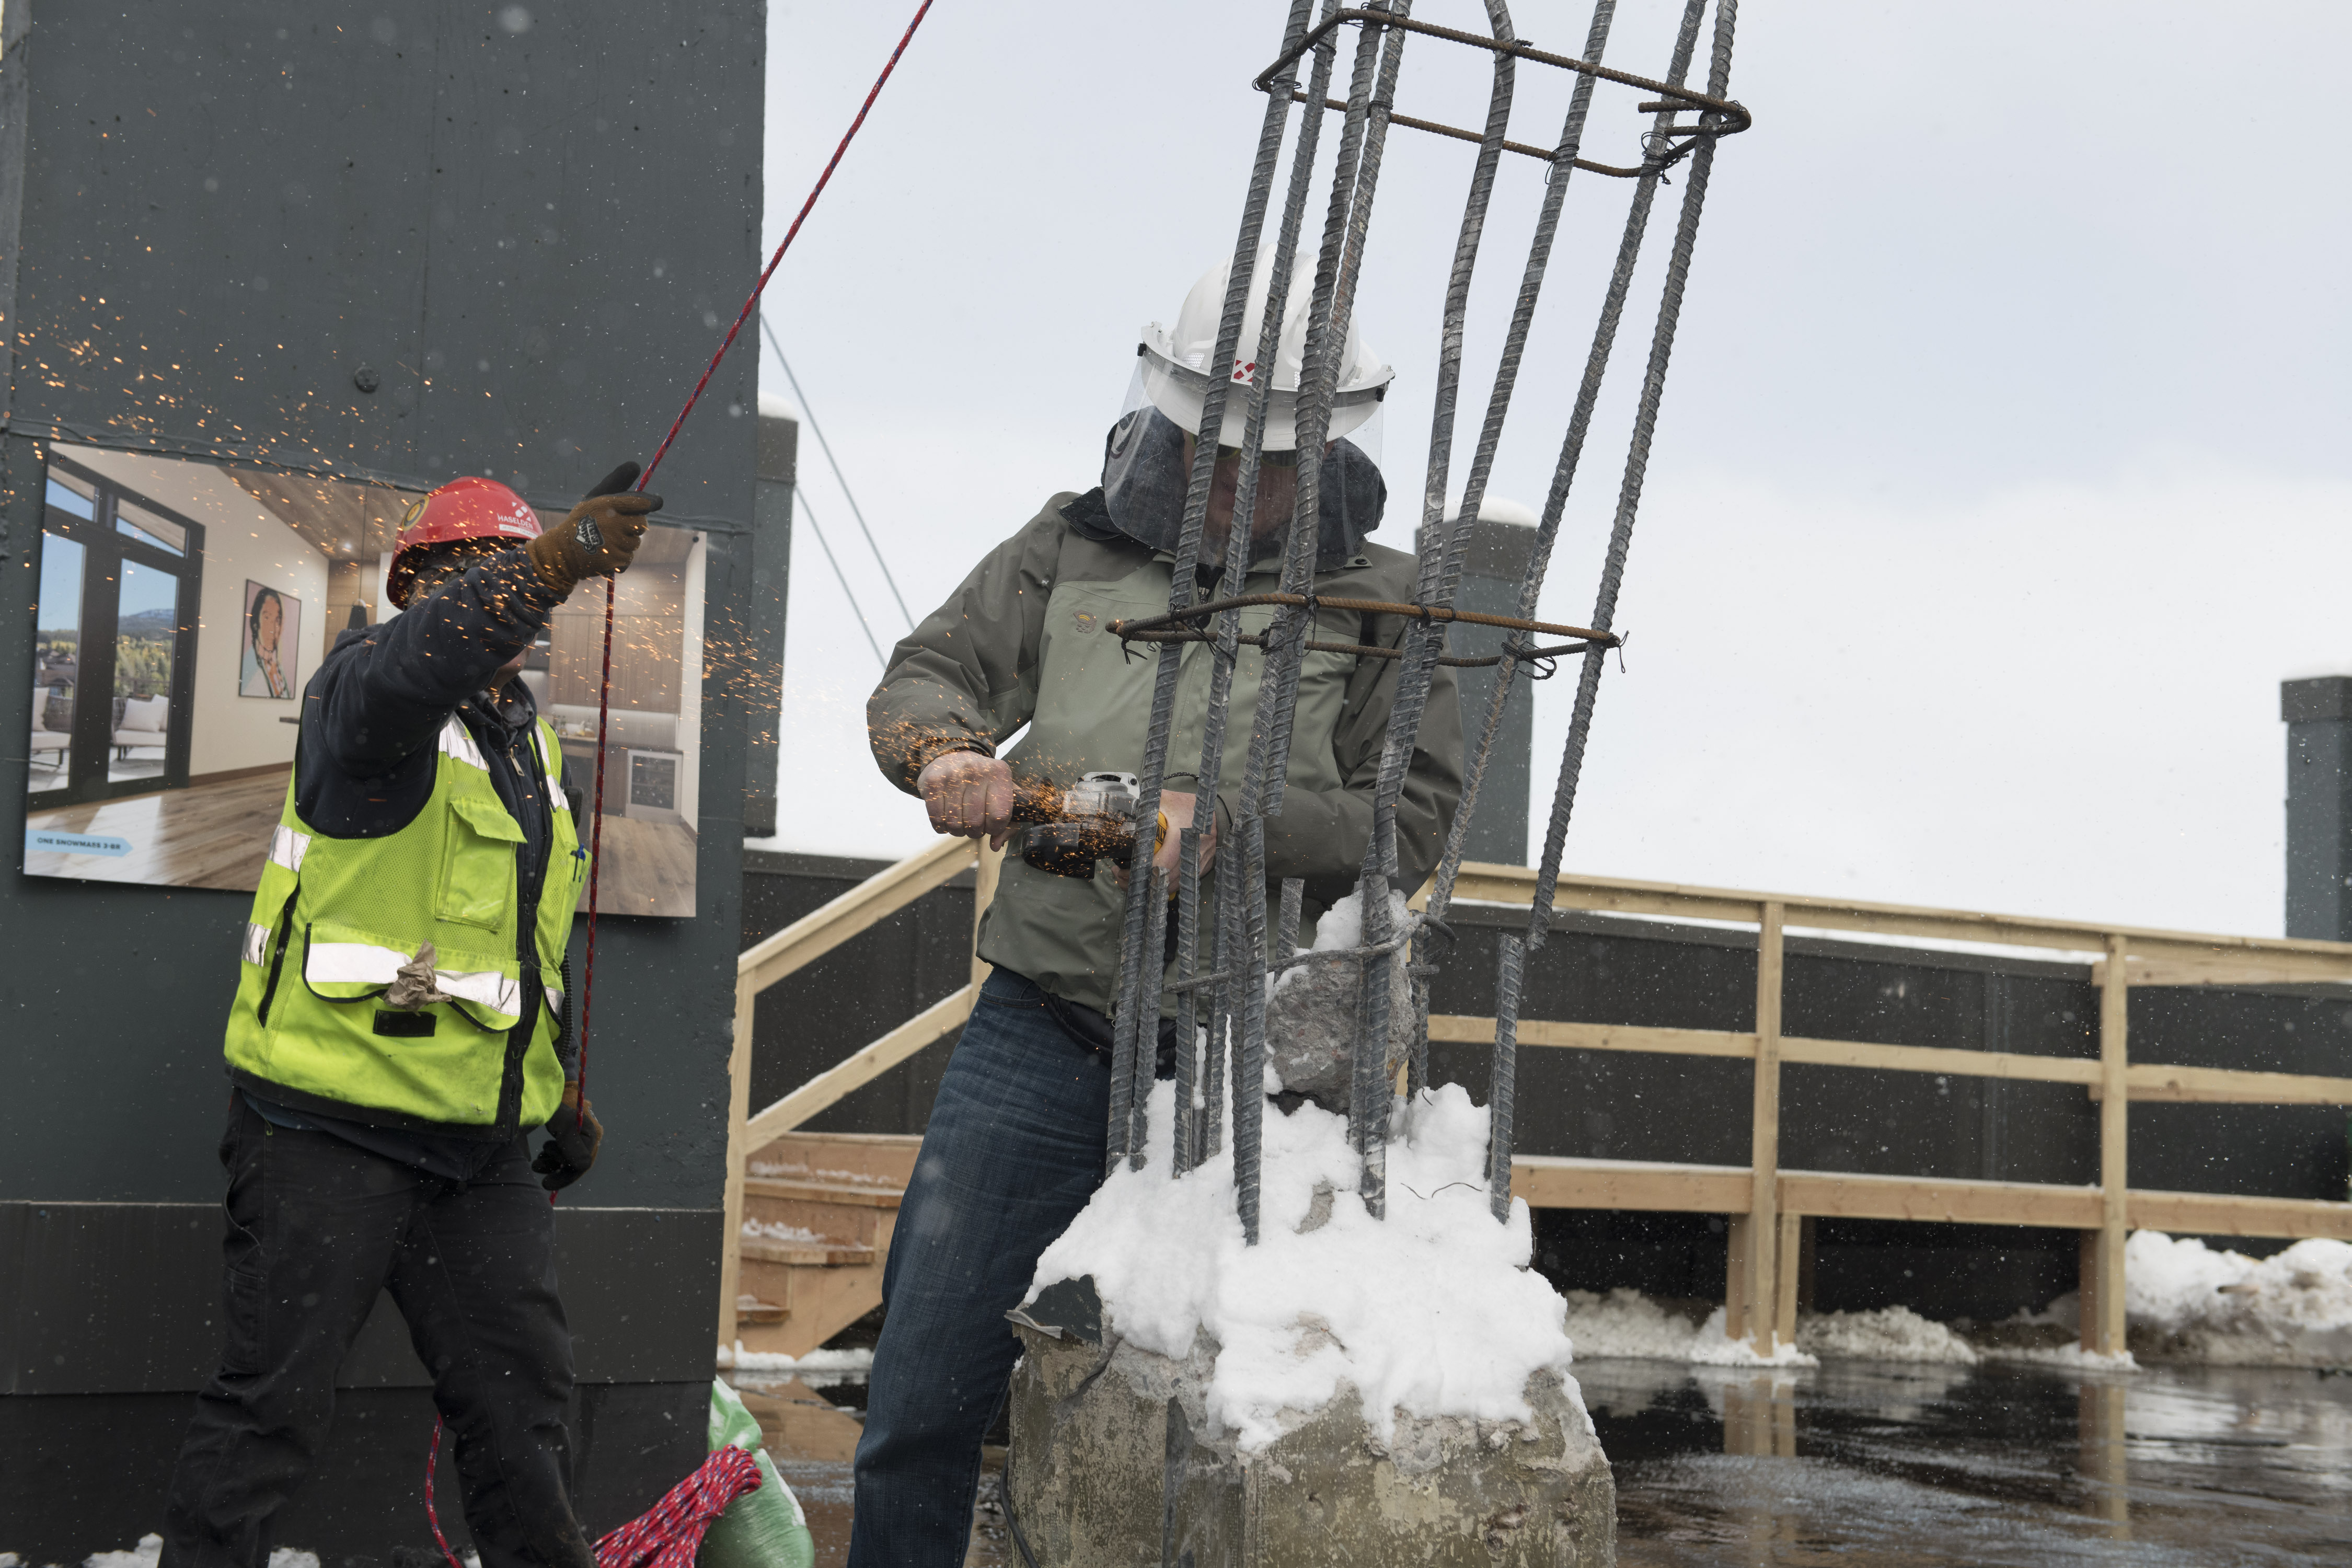 John Calhoun from East West Partners cuts through the rebar to signify the start of construction on One Snowmass – the latest project underway now at Snowmass Base Village.